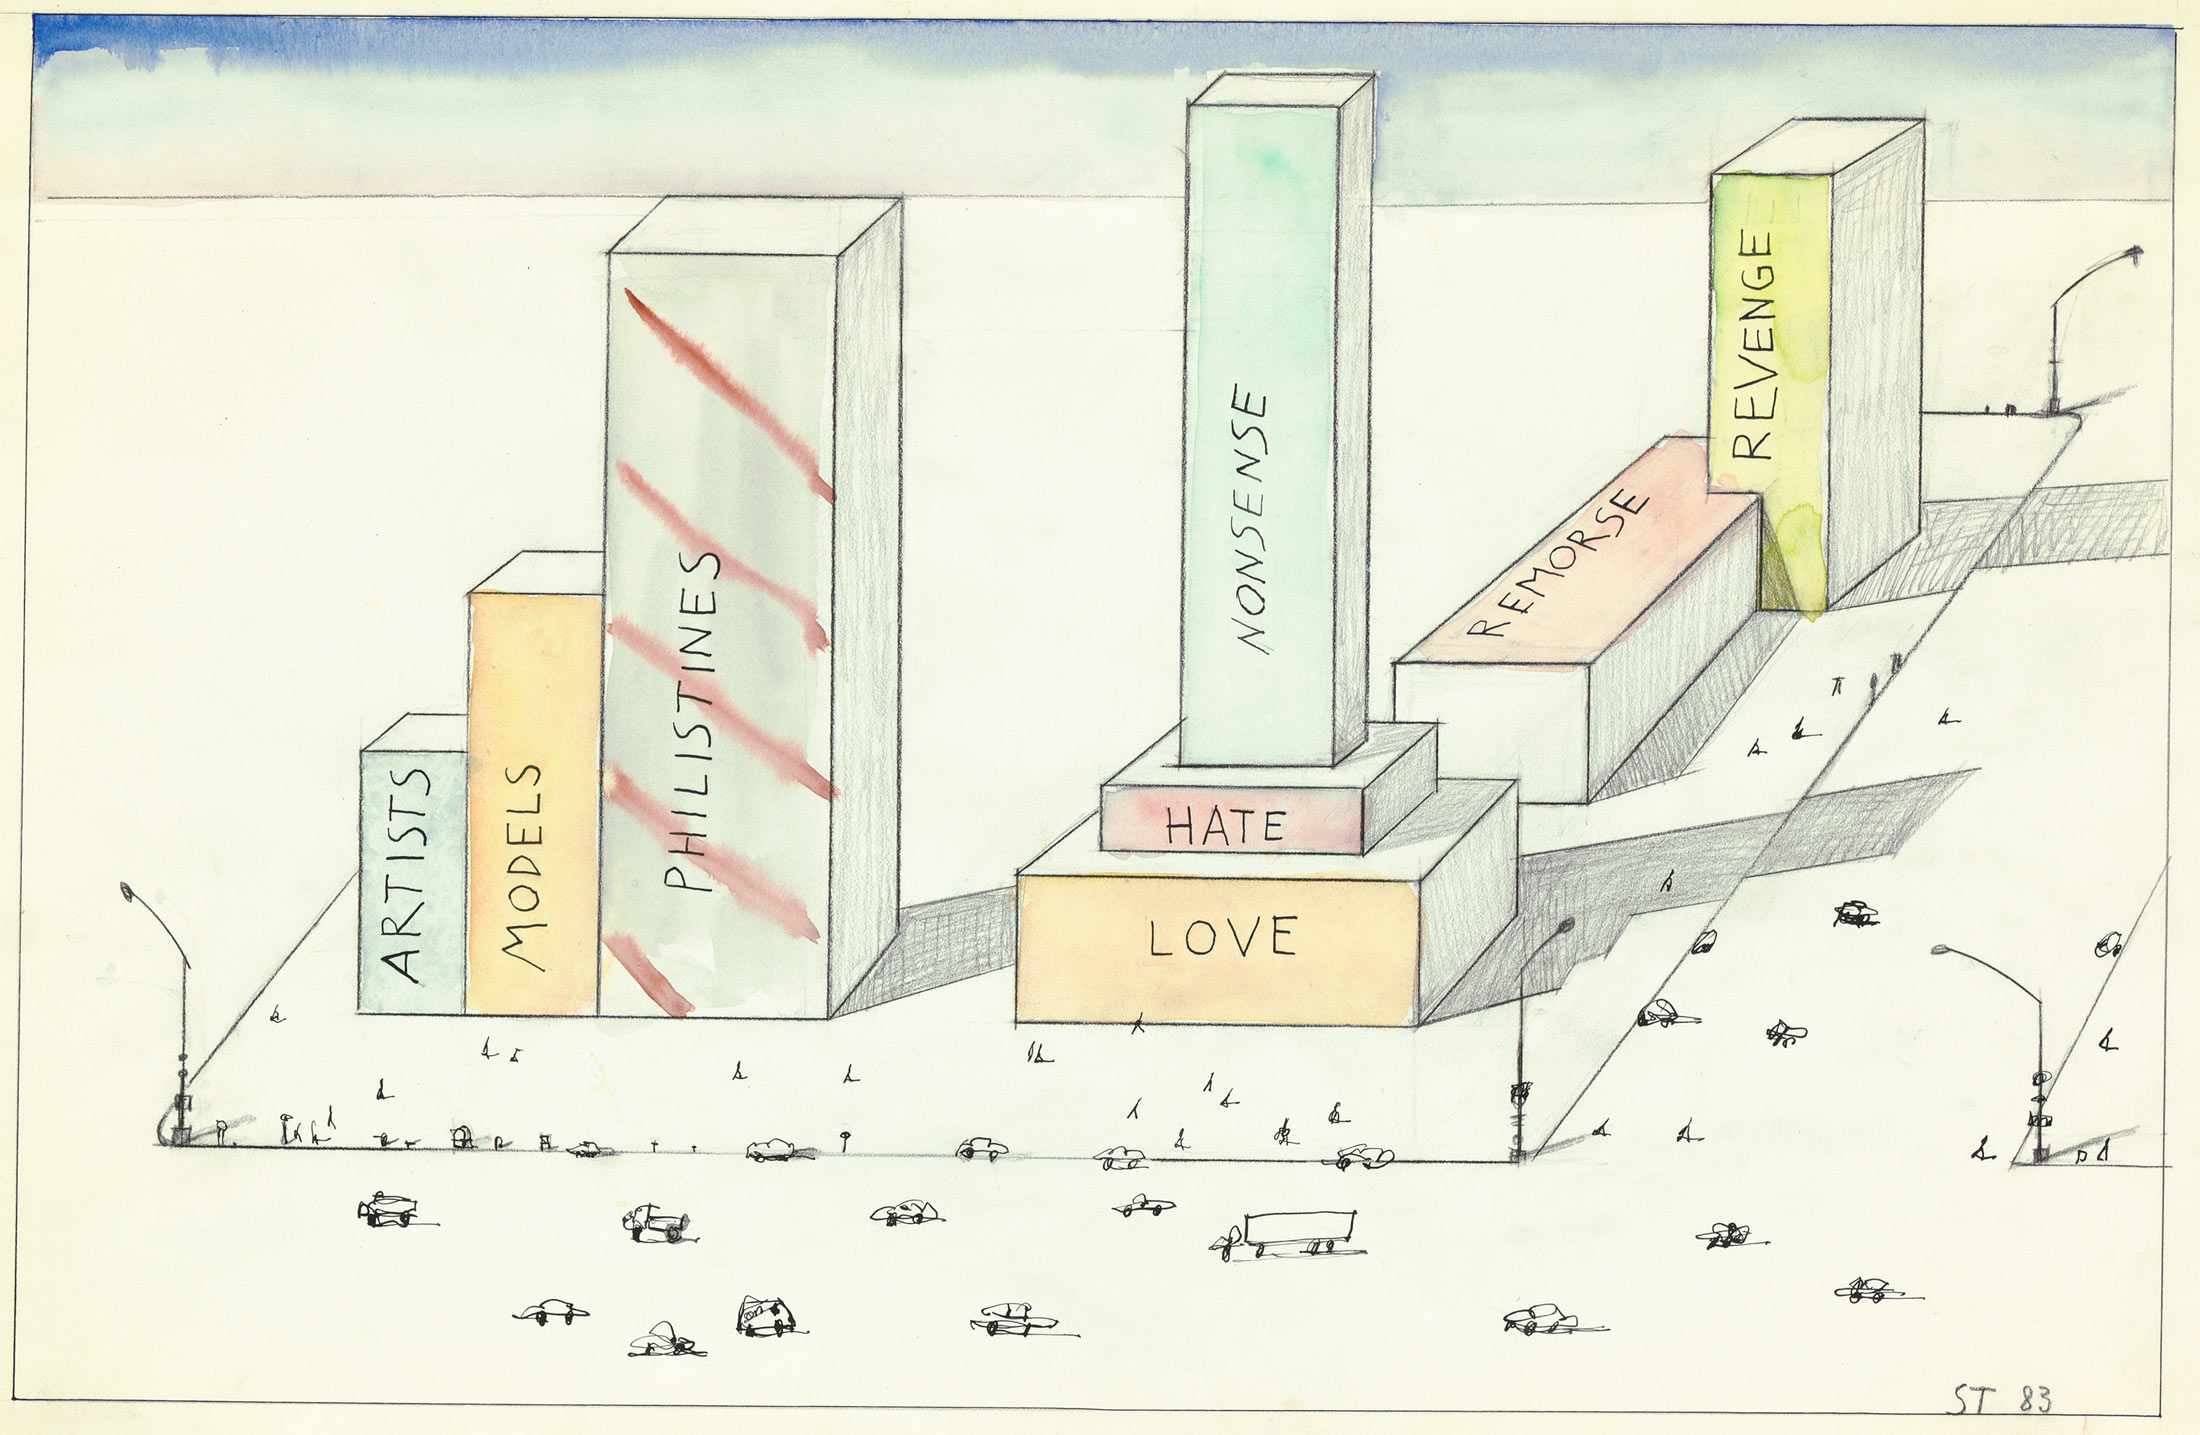 Original drawing for the portfolio “Statistics,” The New Yorker, February 21, 1983. Ink, pencil, colored pencil, and watercolor on paper, 14 ½ x 23 in. Centre Pompidou, Paris; Gift of The Saul Steinberg Foundation.